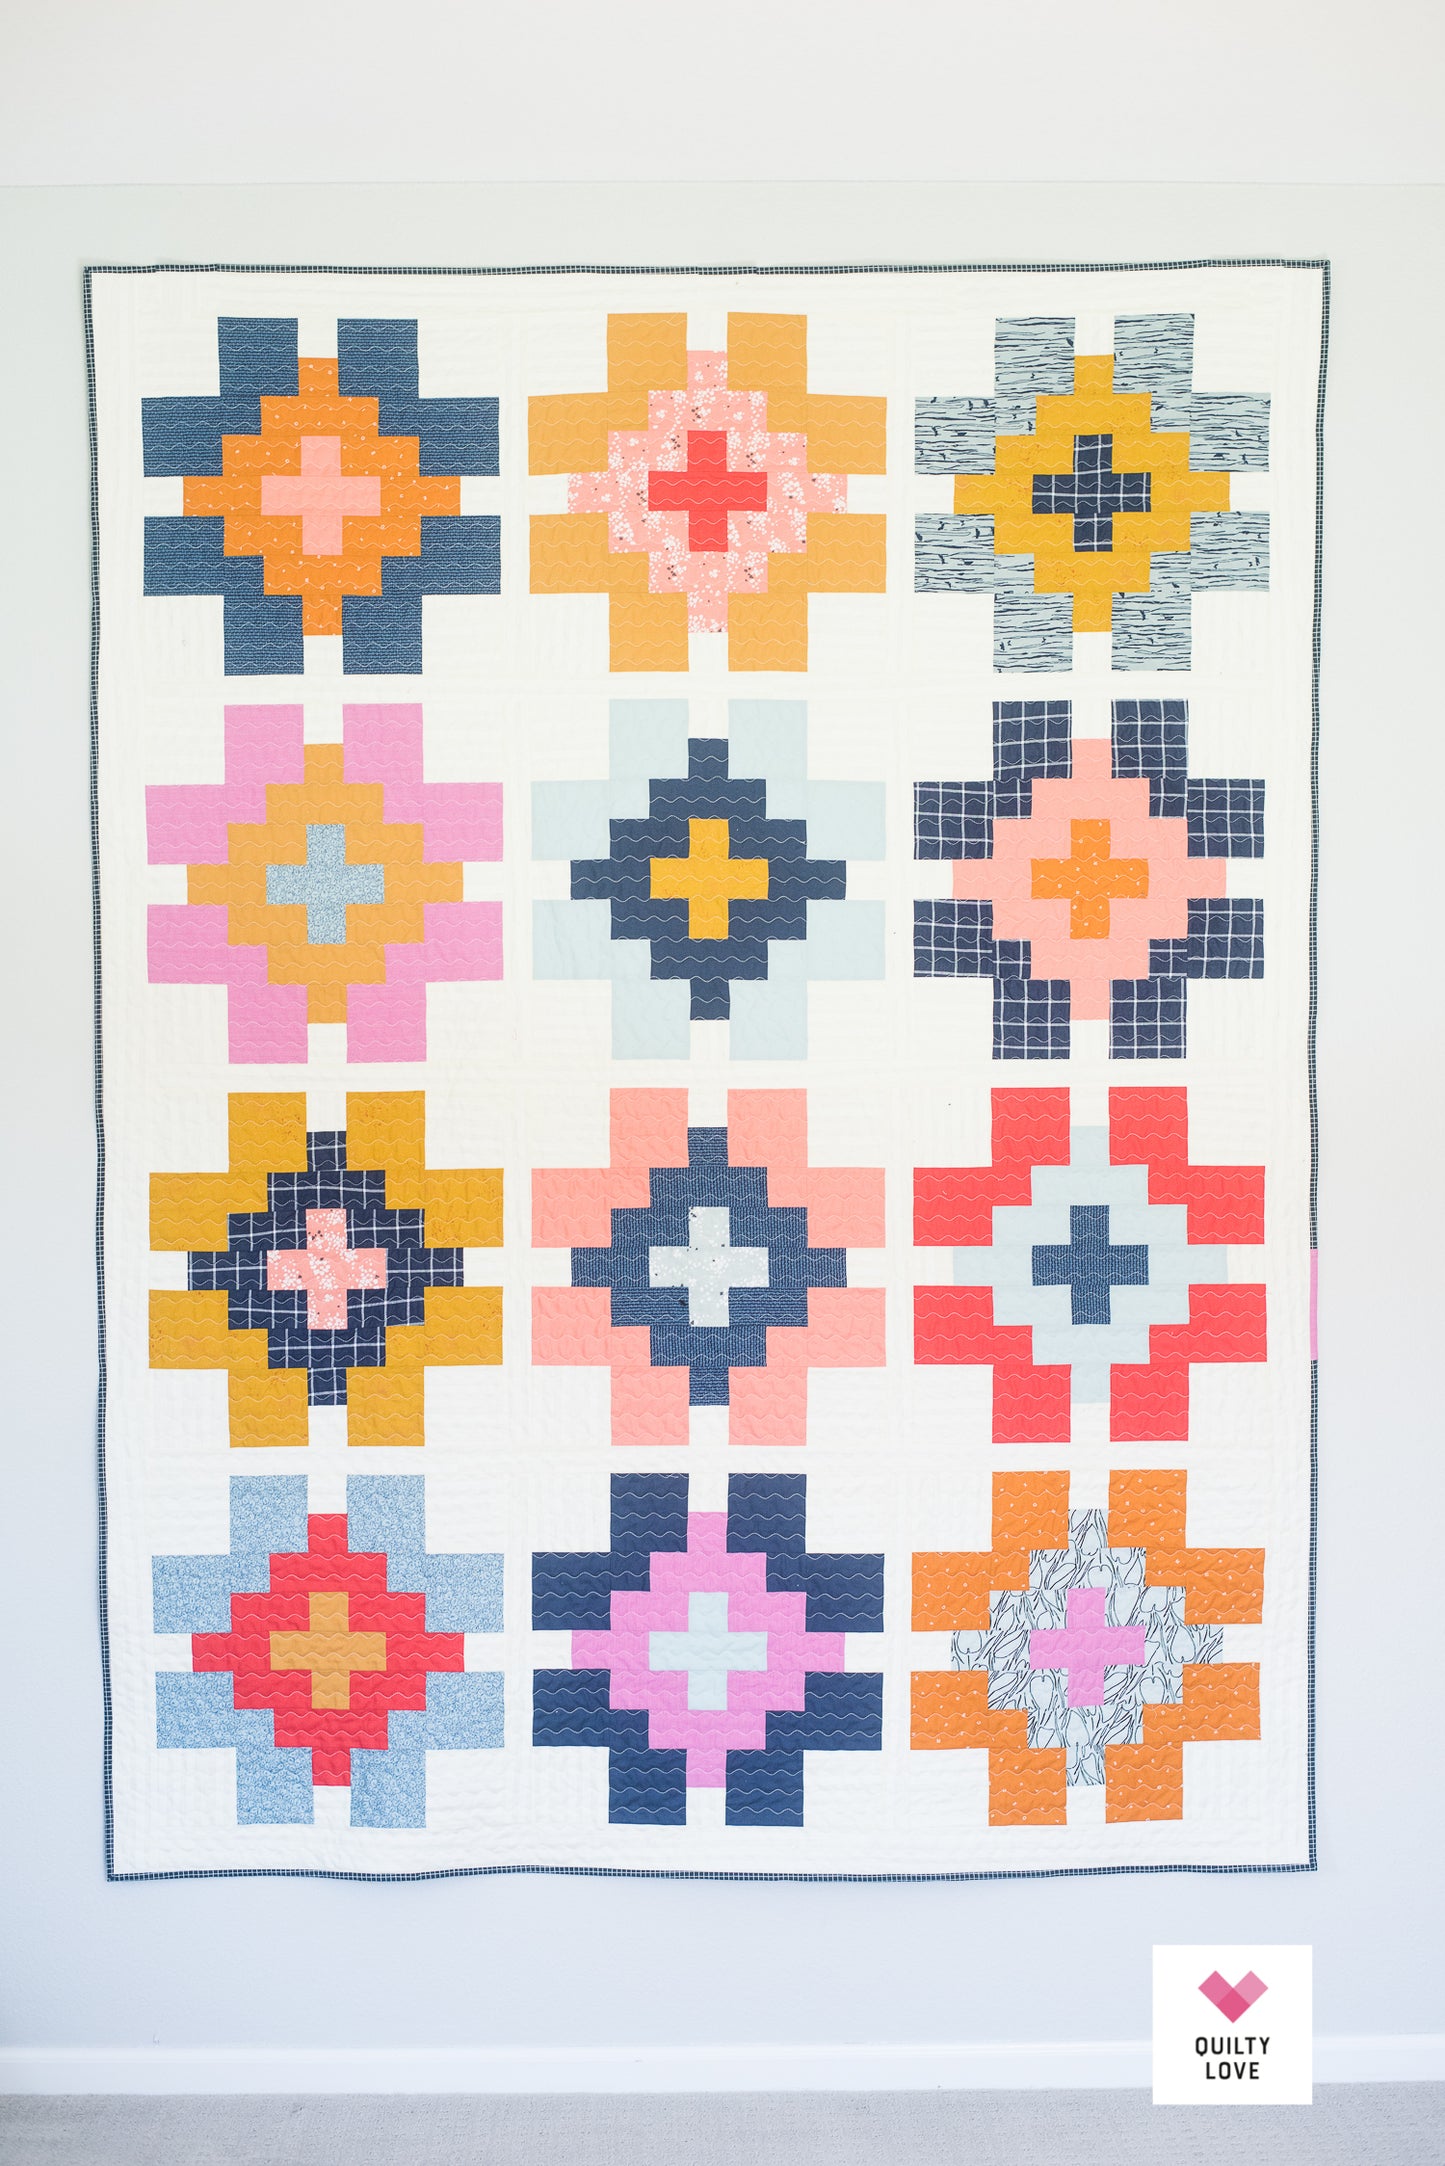 Glowing PAPER Quilt Pattern